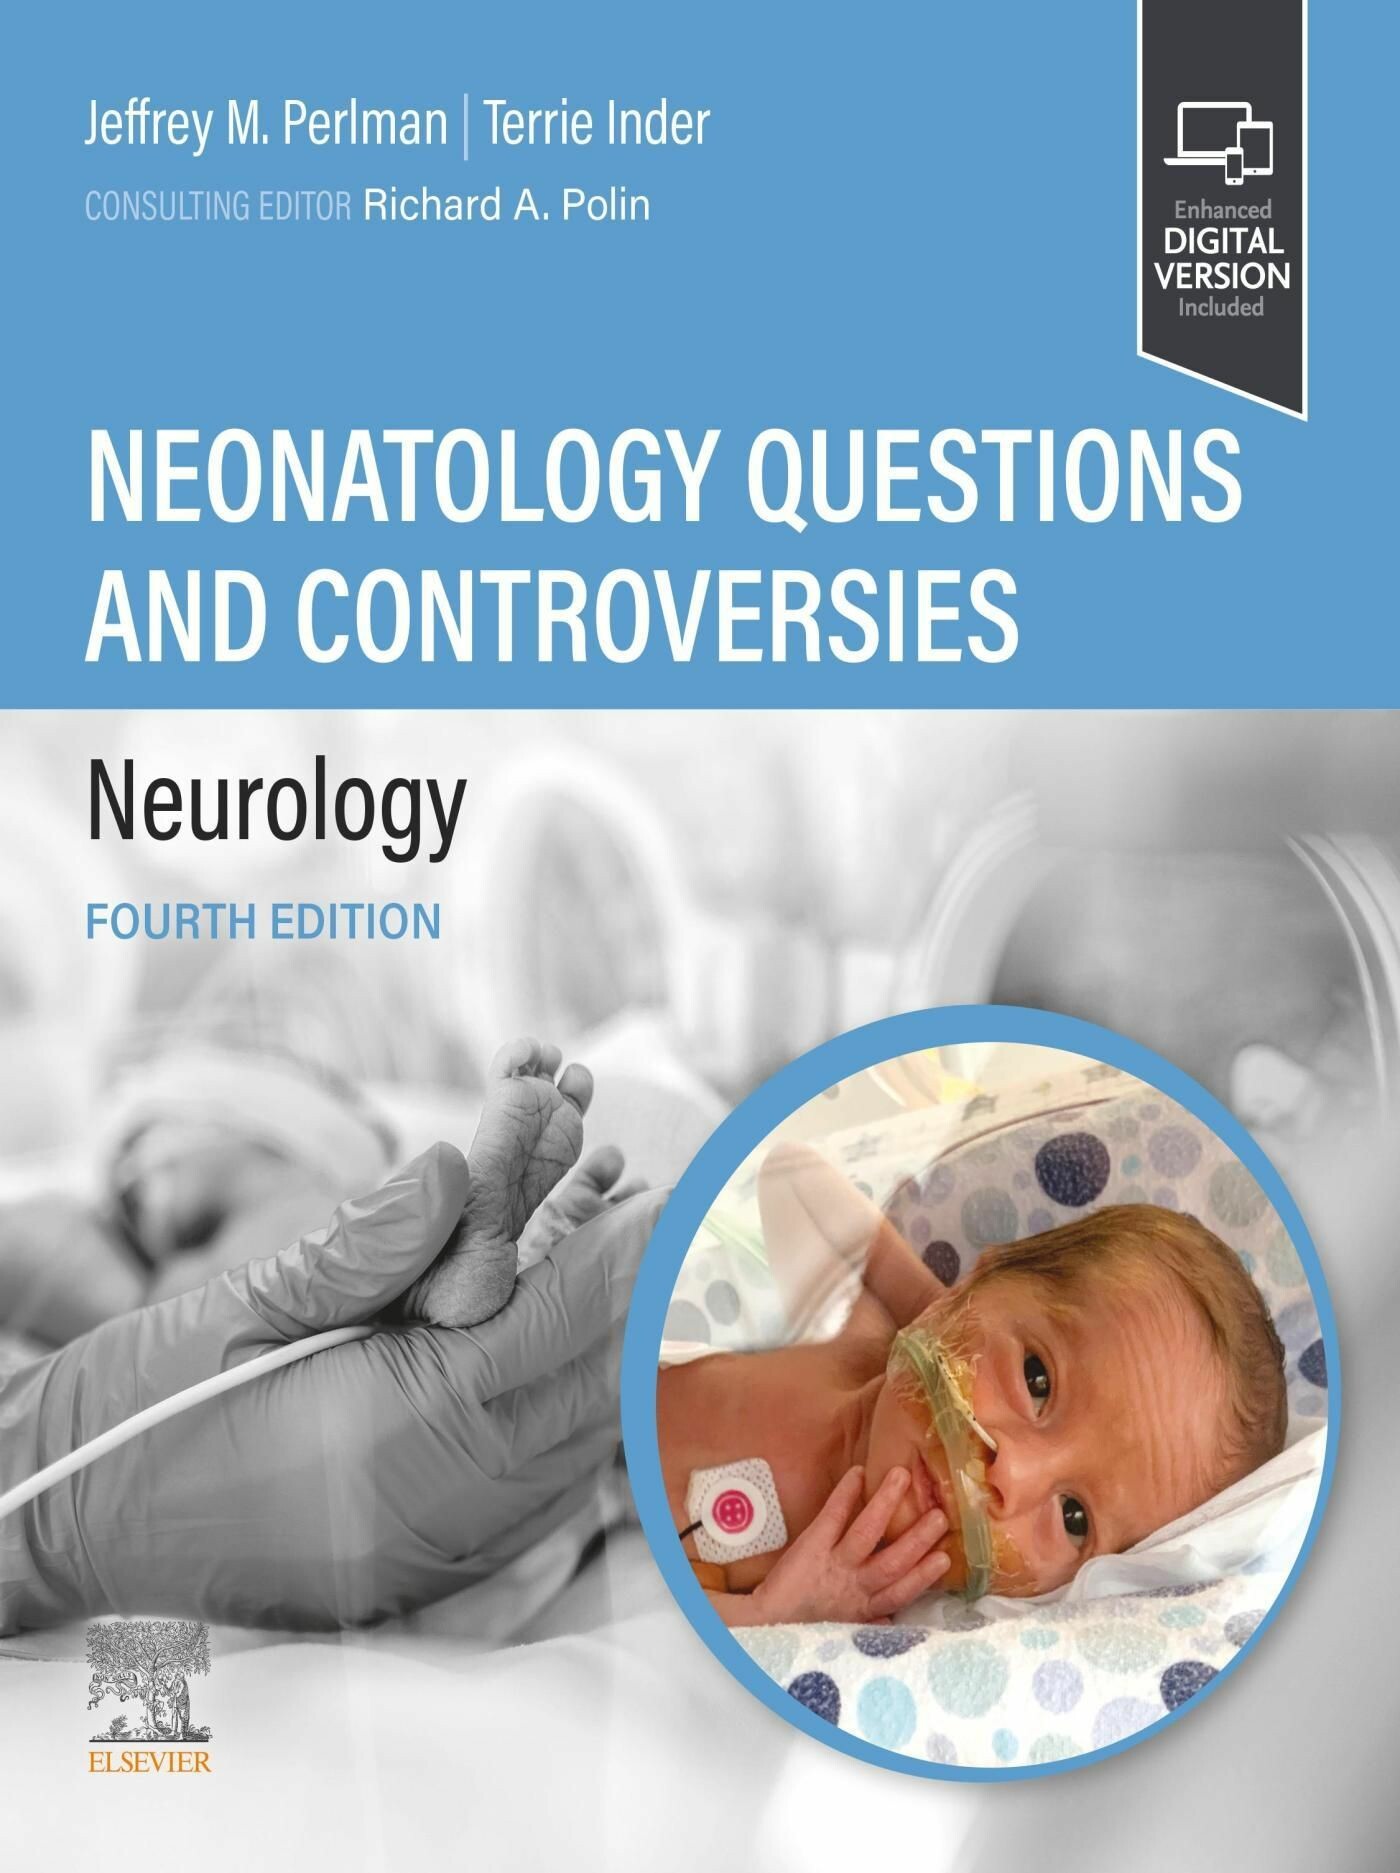 Neonatal Questions and Controversies: Neurology - E-Book